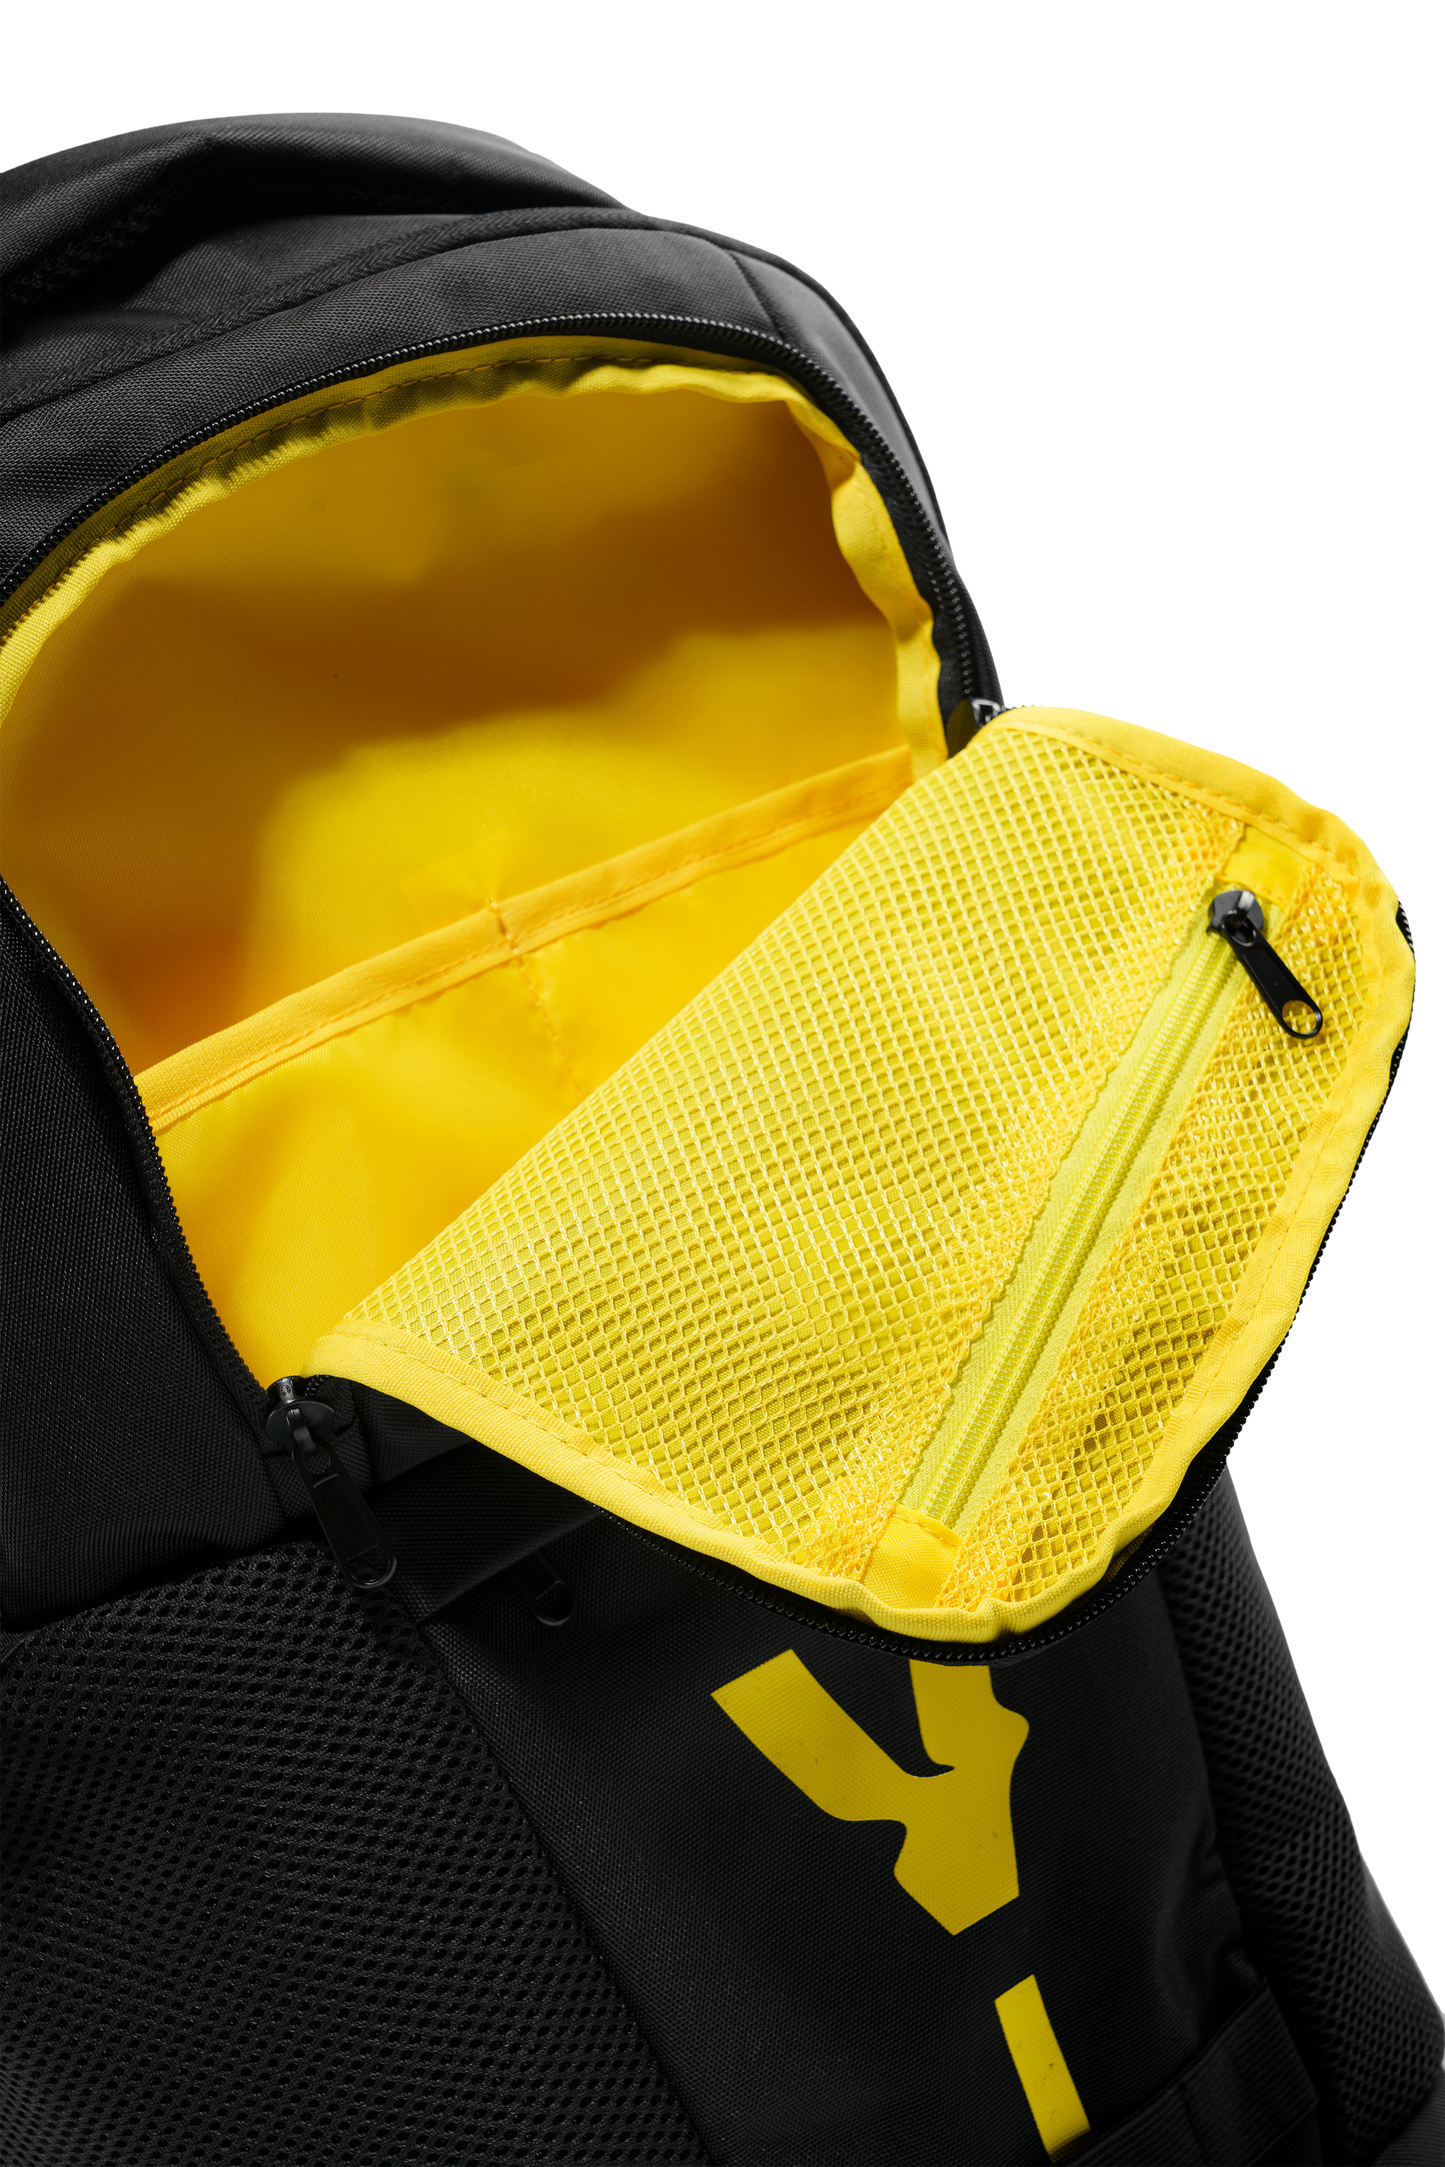 The Volt Backpack available for sale at GSM Sports.